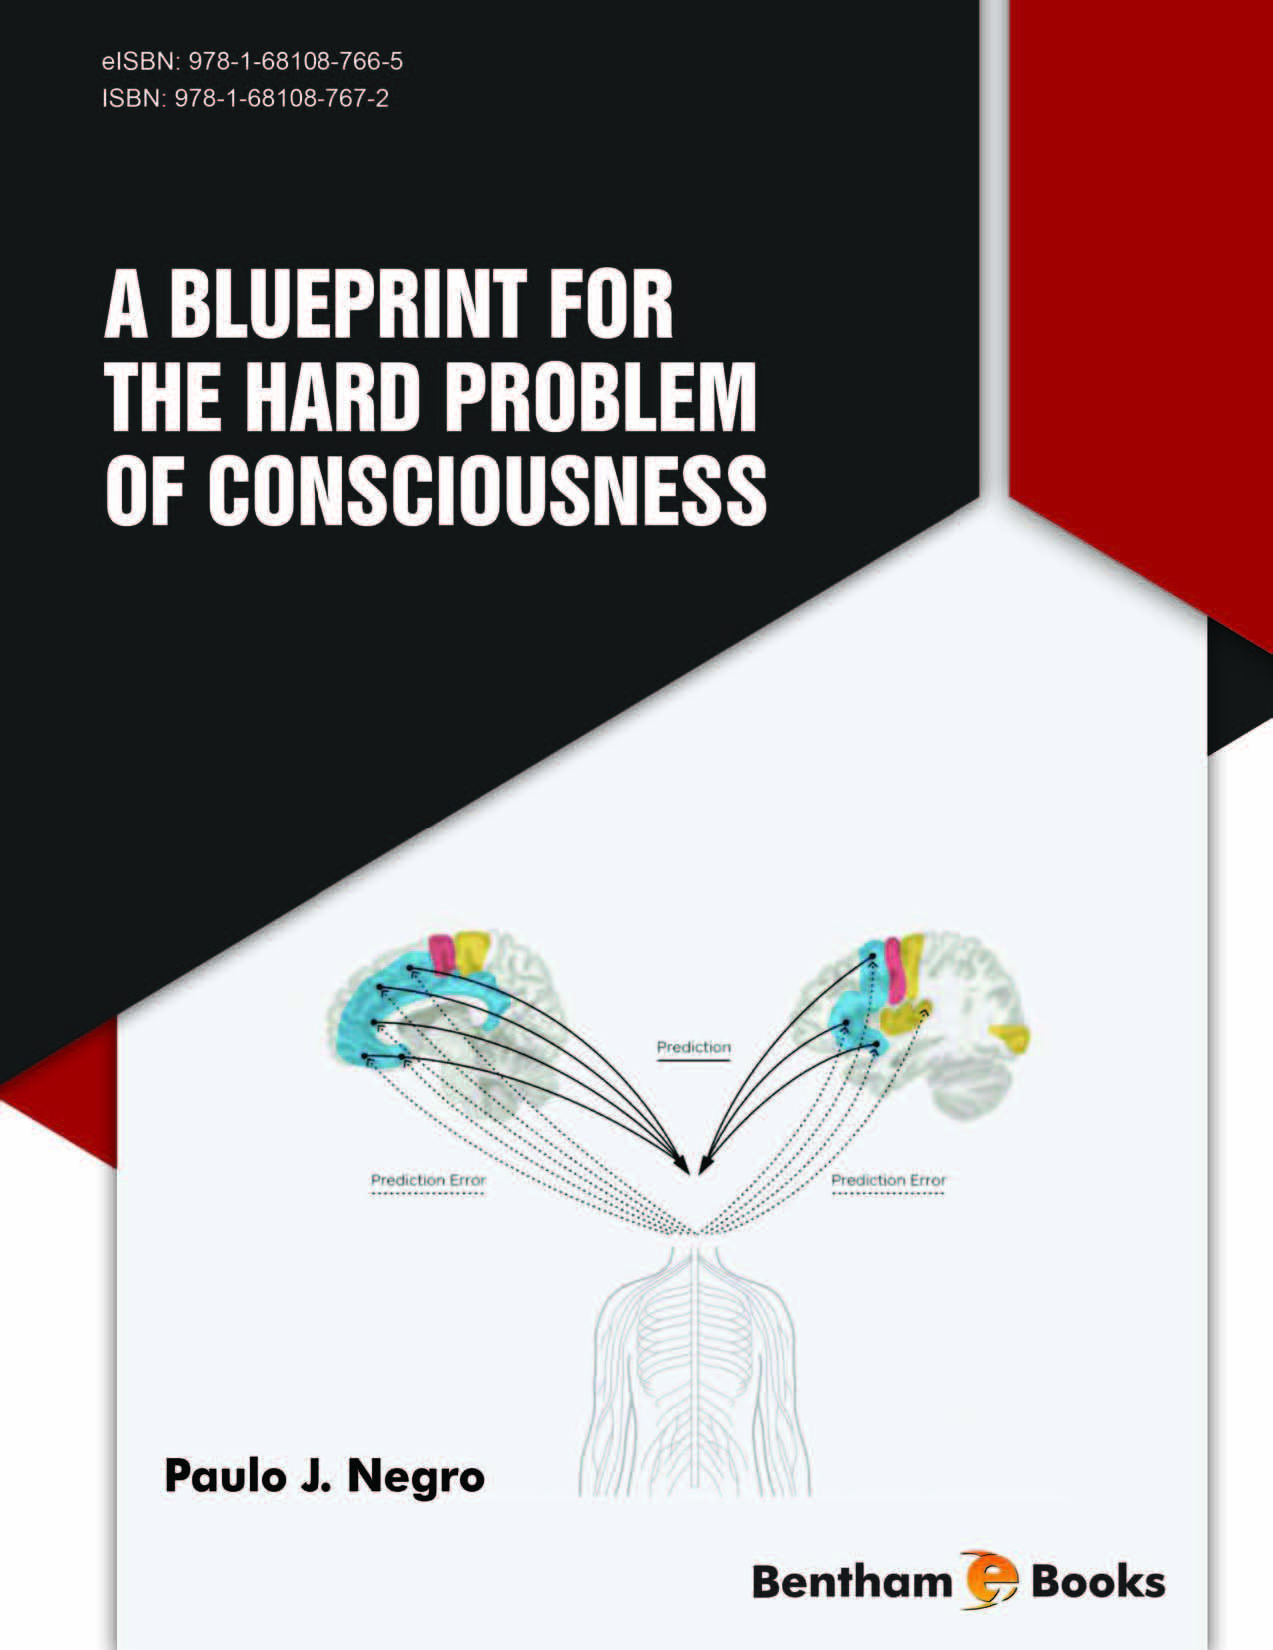 A Blueprint for the Hard Problem of Consciousness